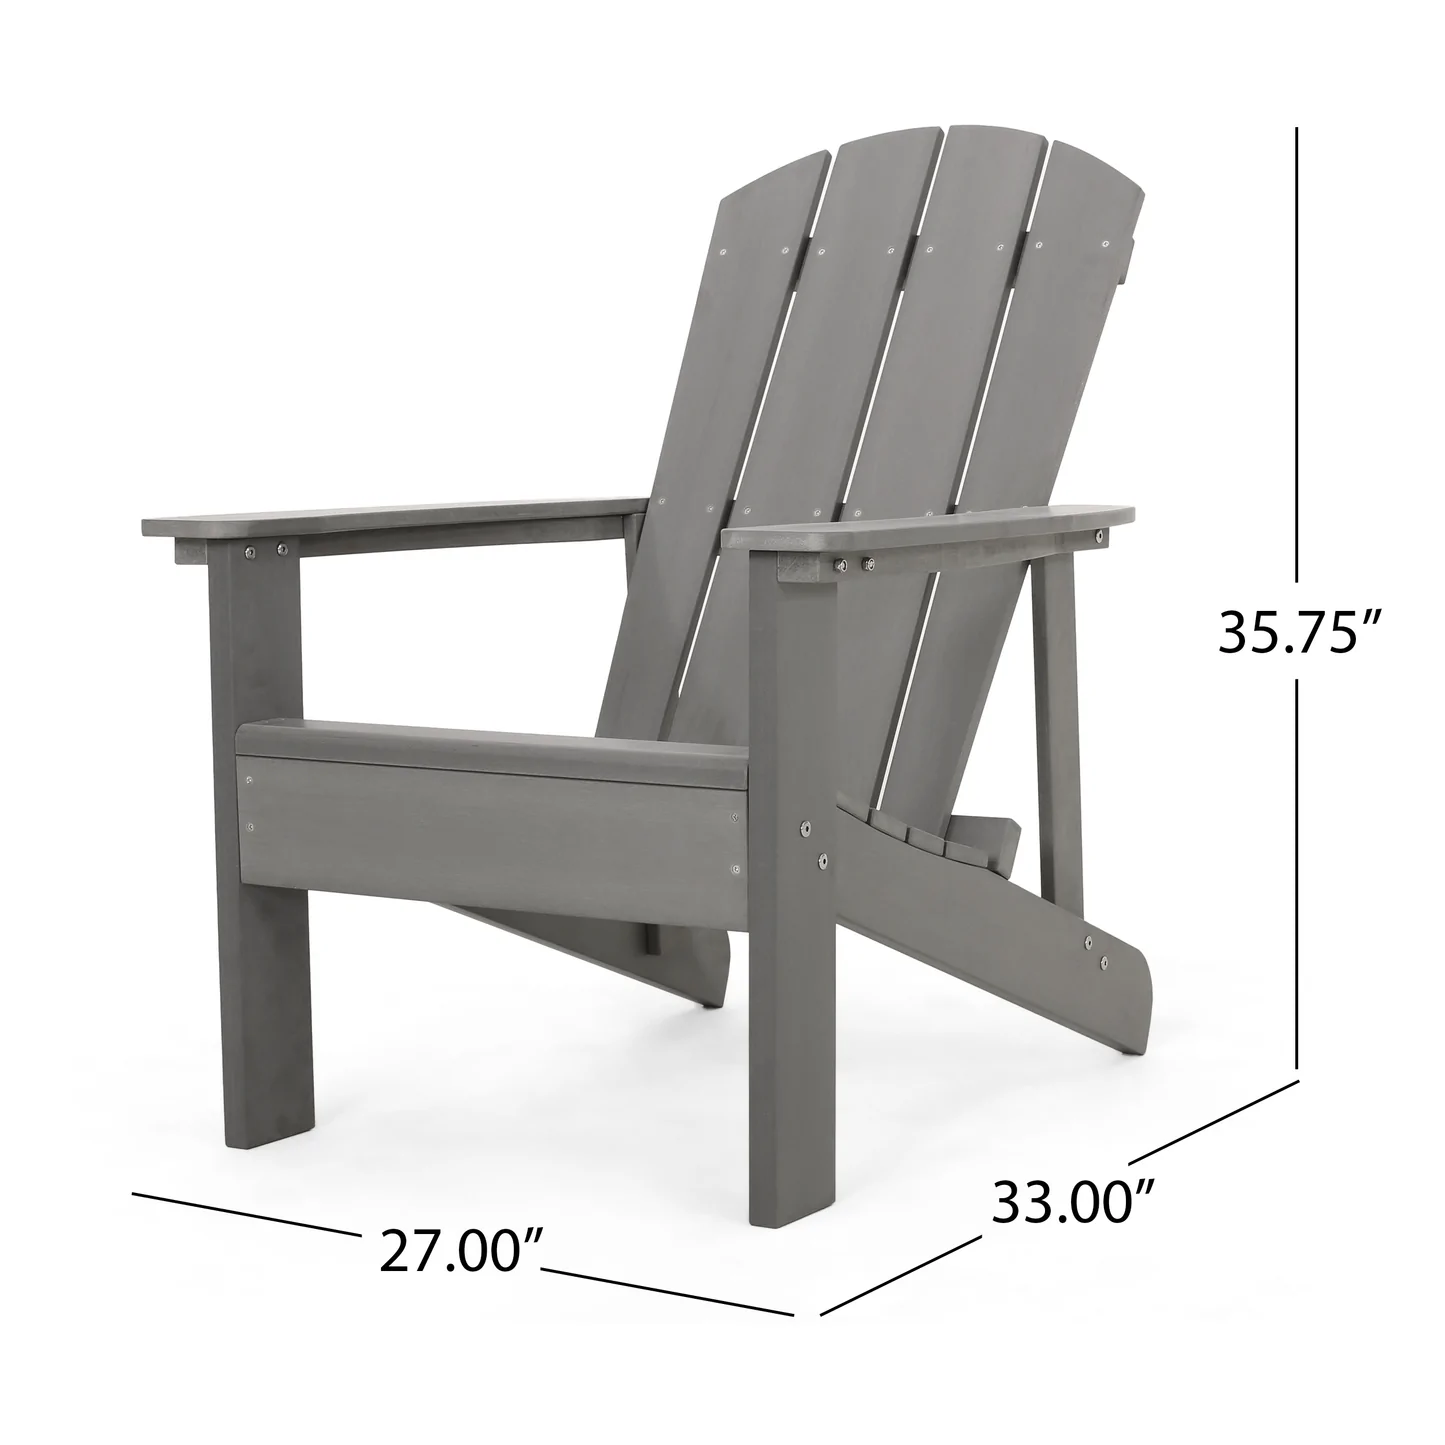 LANTRO JS Classic Solid Gray Outdoor Solid Wood Adirondack Chair Garden Lounge Chair - image 4 of 8